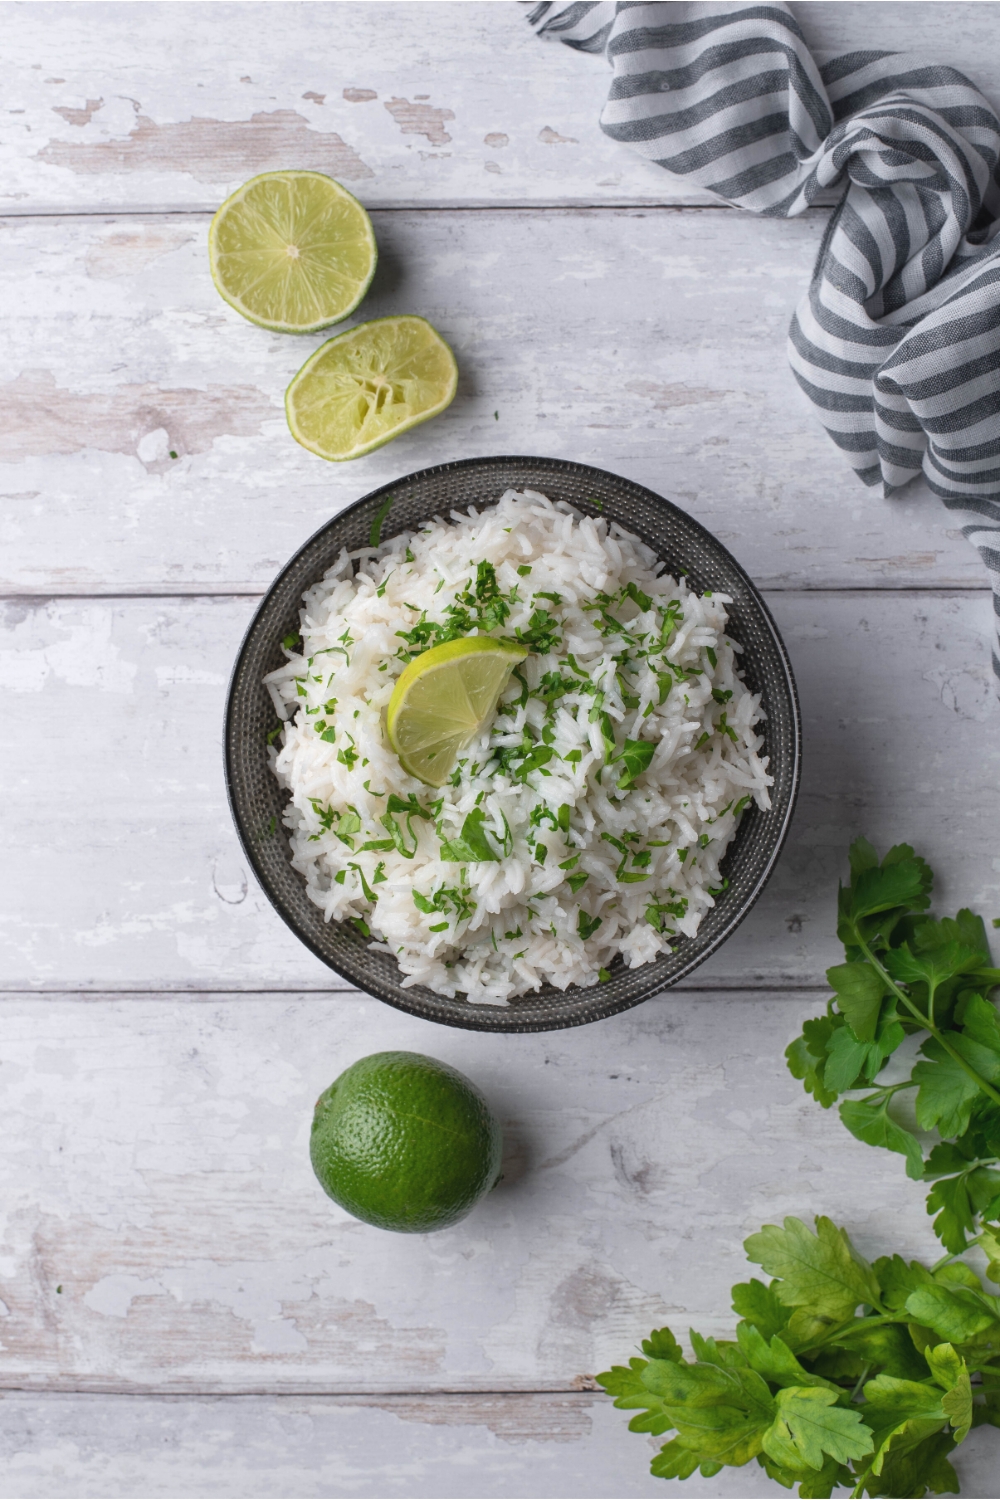 Chipotle cilantro lime rice in a bowl on a counter.